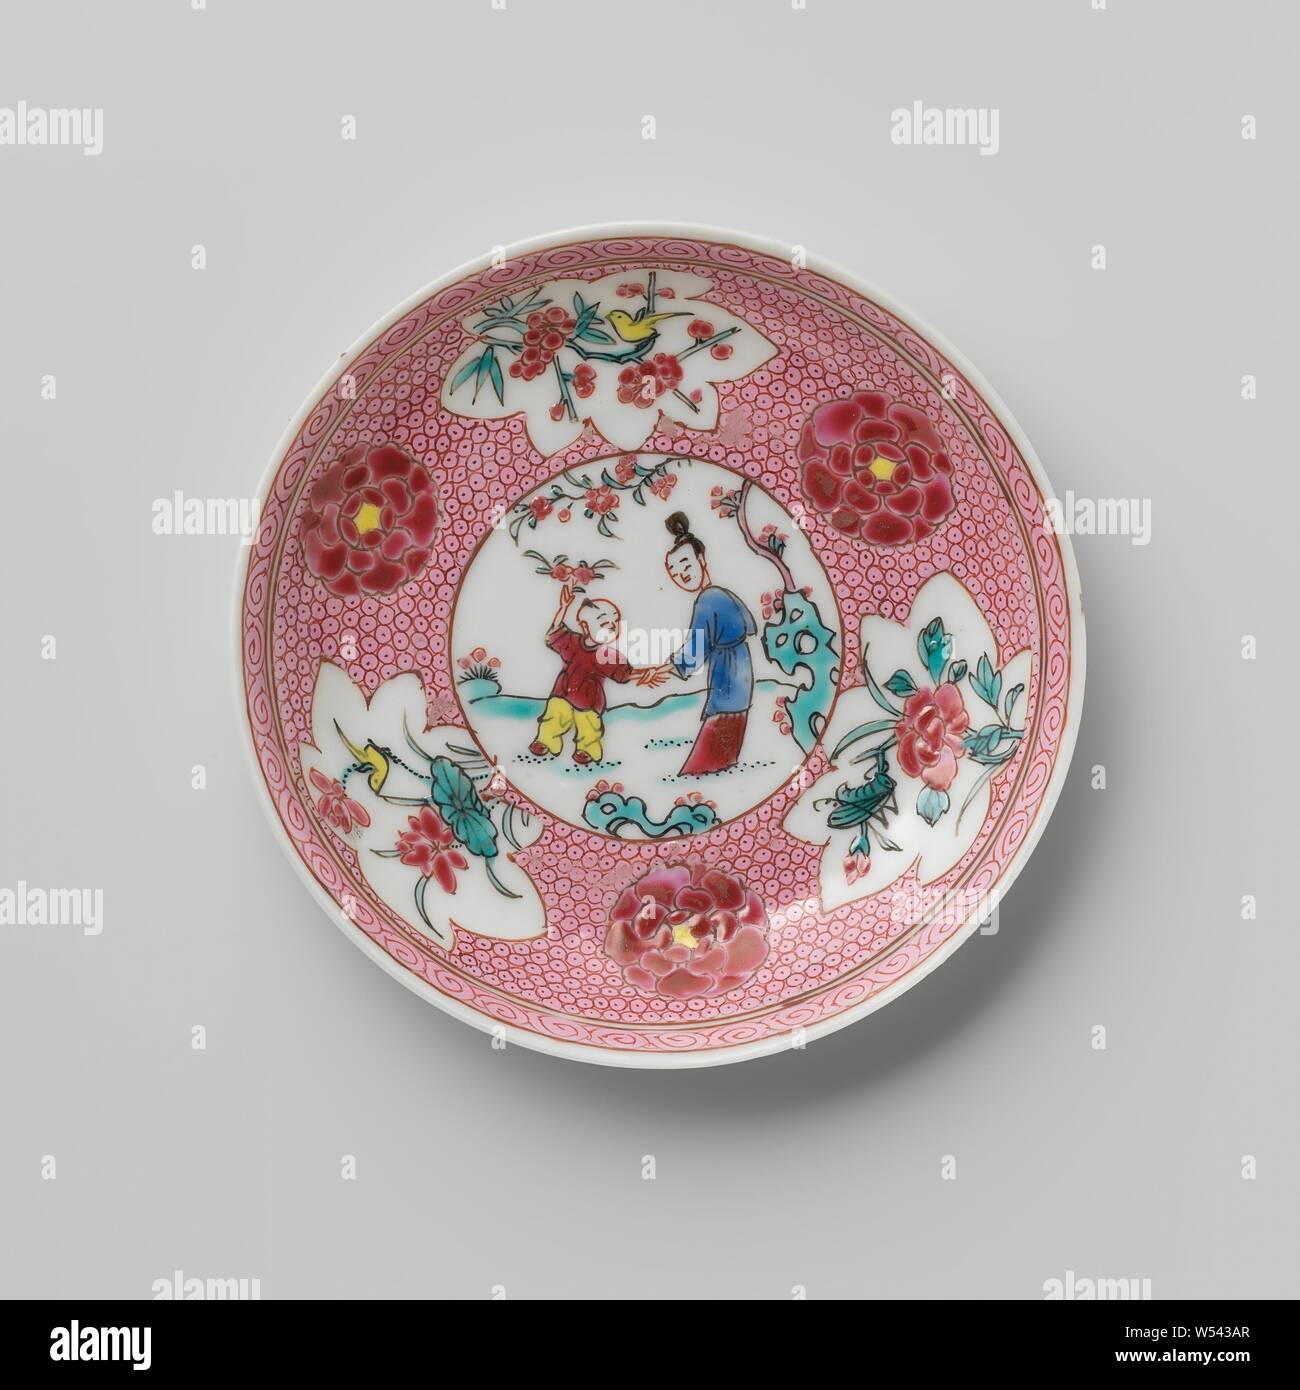 Saucer with a Chinese lady and boy in a landscape and flower sprays on diaper pattern, Porcelain dish with a spreading wall, painted on the glaze in blue, red, pink, green, yellow and black. On the plate of the dish a medallion with a Chinese lady and a boy in a landscape with trees and rocks, the medallion napkin with three flowers and three cartouches with a bird or insect on a flower branch (prunus, peony, lotus), the inner edge with a curled band. Famille rose., anonymous, China, c. 1725 - c. 1749, Qing-dynasty (1644-1912) / Yongzheng-period (1723-1735) / Qianlong-period (1736-1795 Stock Photo